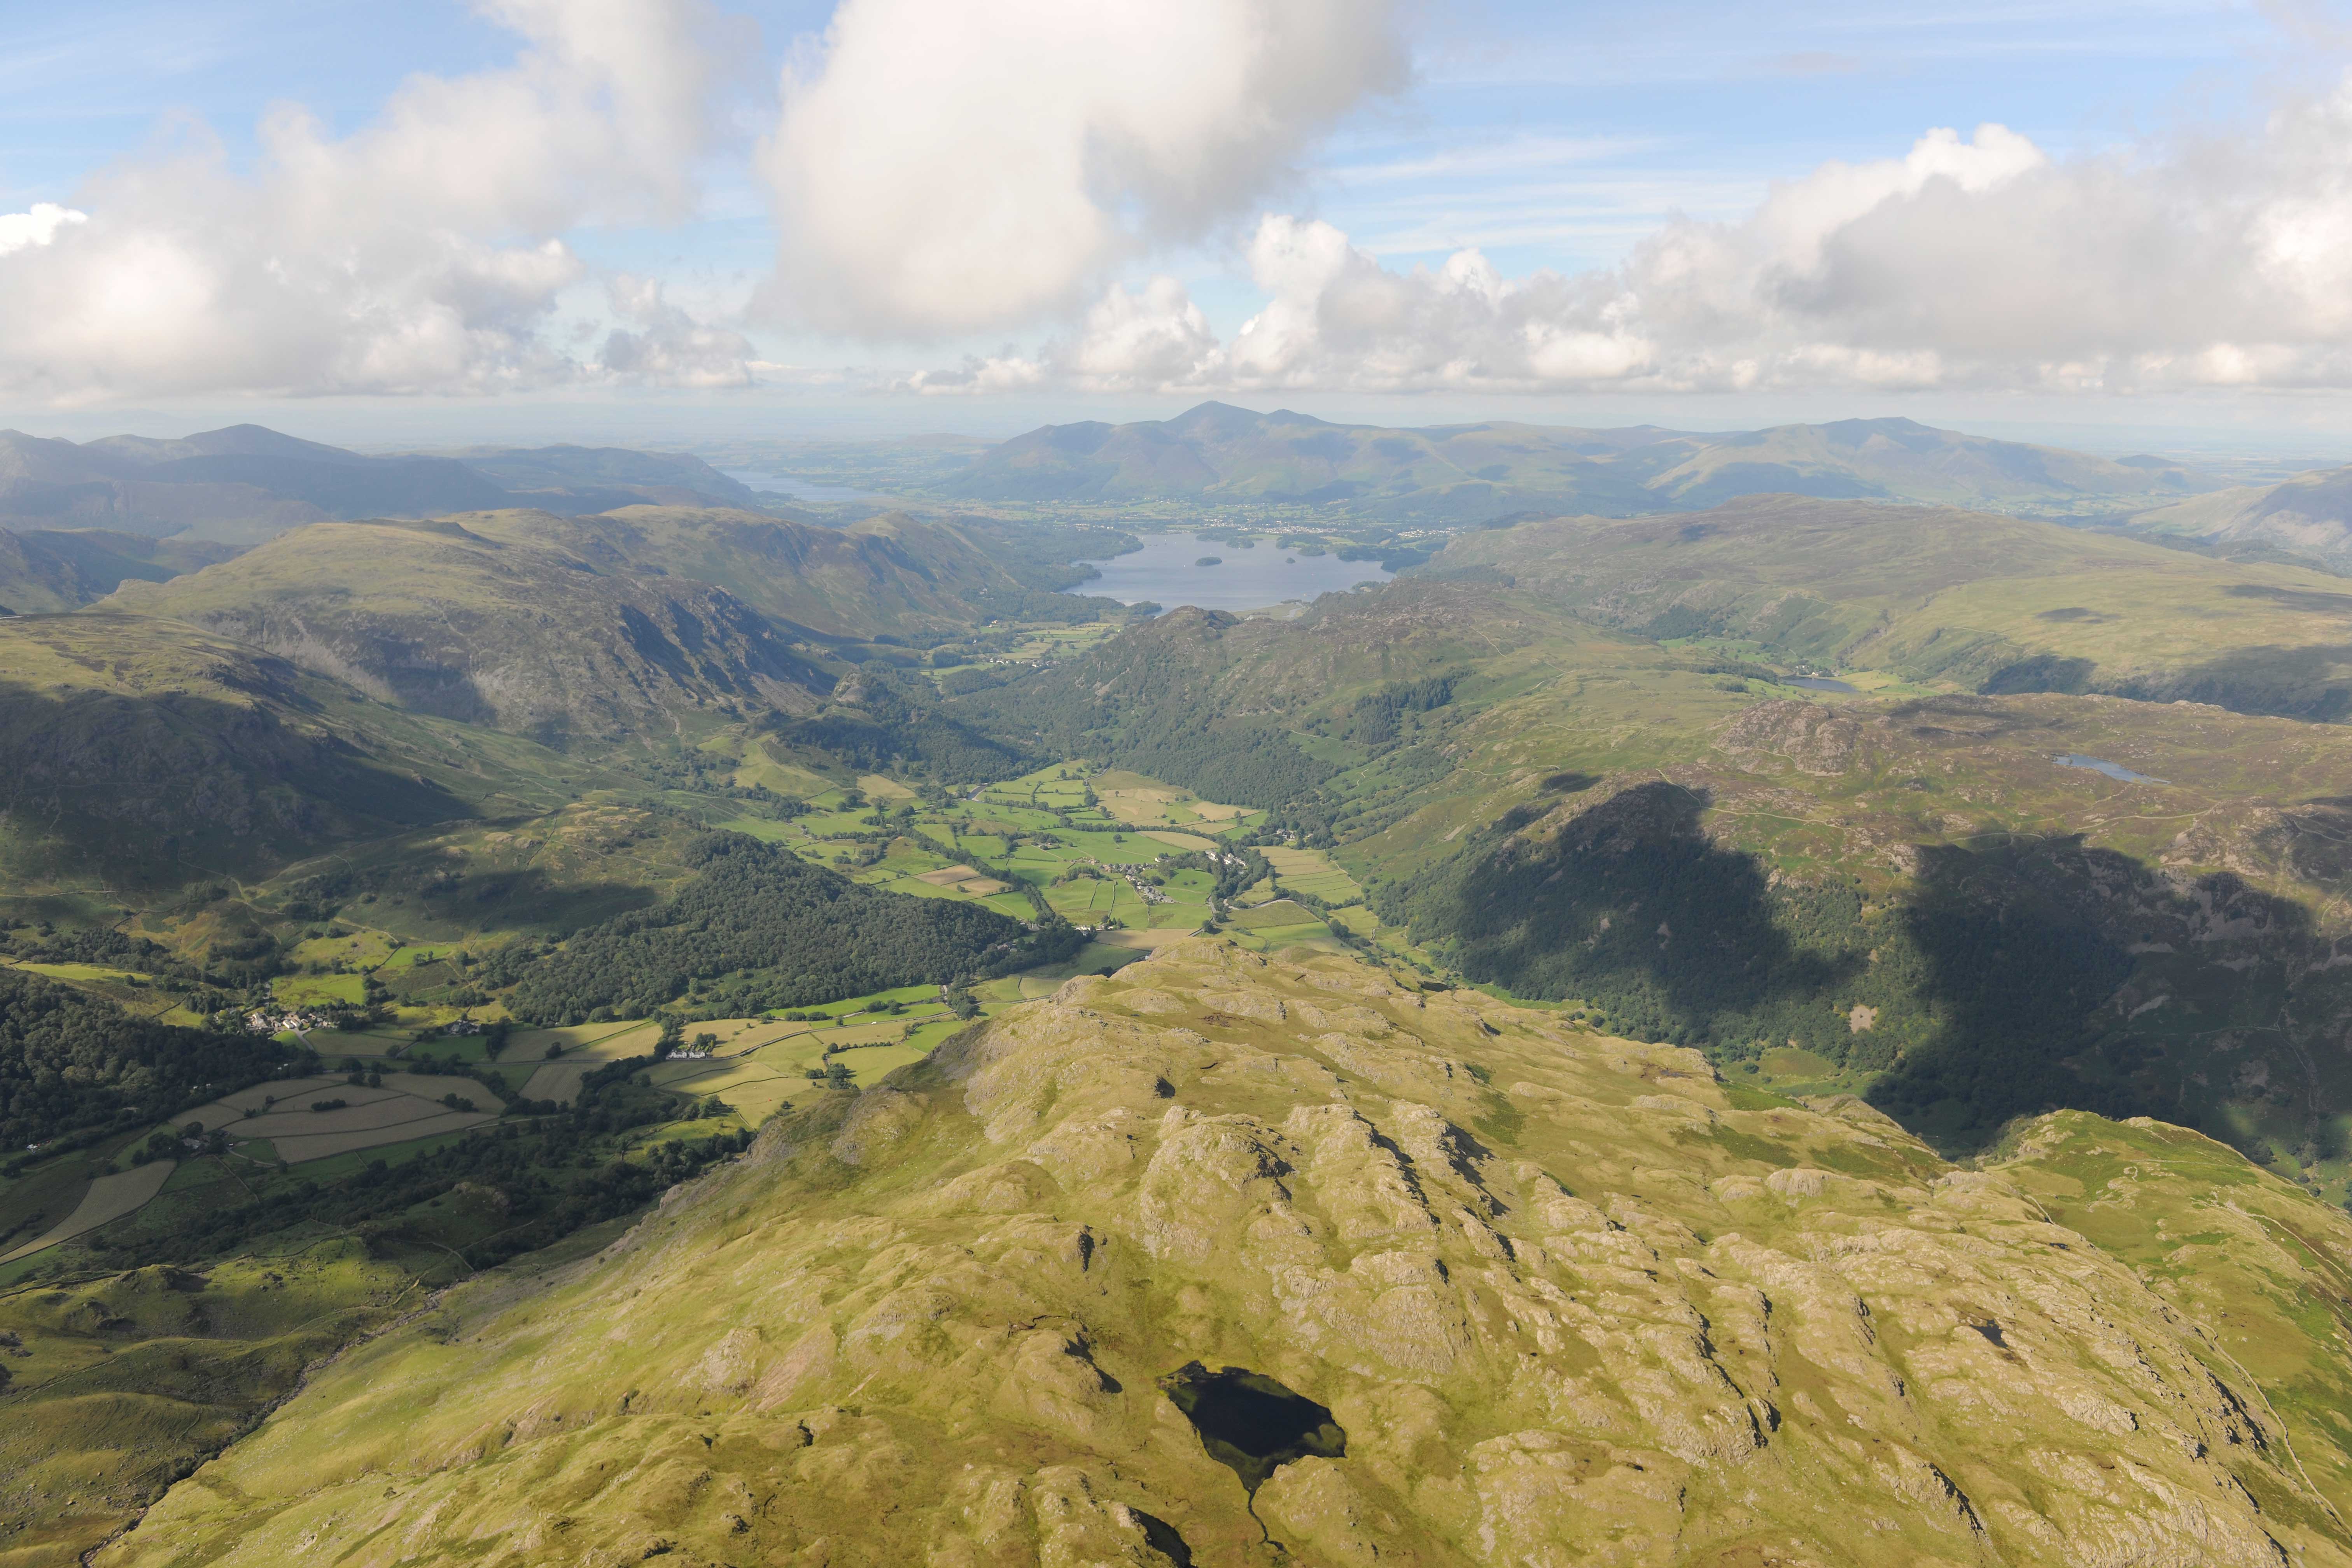 Aerial view of Rosthwaite Fell with Derwent Water and Bassenthwaite Lake in the distance.